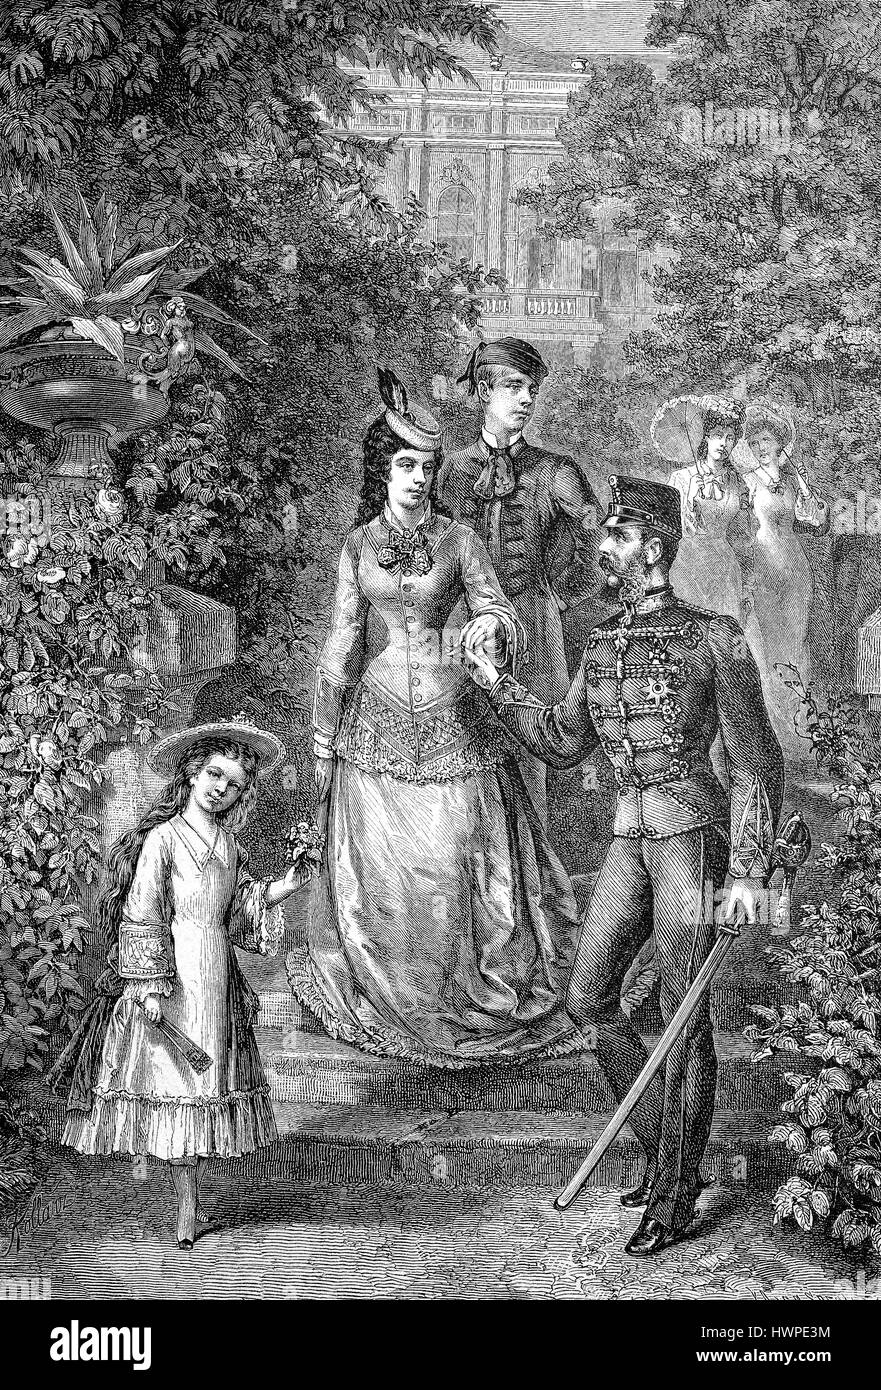 The imperial family of Austria to the summer freshness, Archduchess Marie Valerie, Empress Elisabeth, Crown Prince Rudolph, Emperor Franz Joseph, in the Park of Gödöllö, Hungary, Reproduction of an original woodcut from the year 1882, digital improved Stock Photo